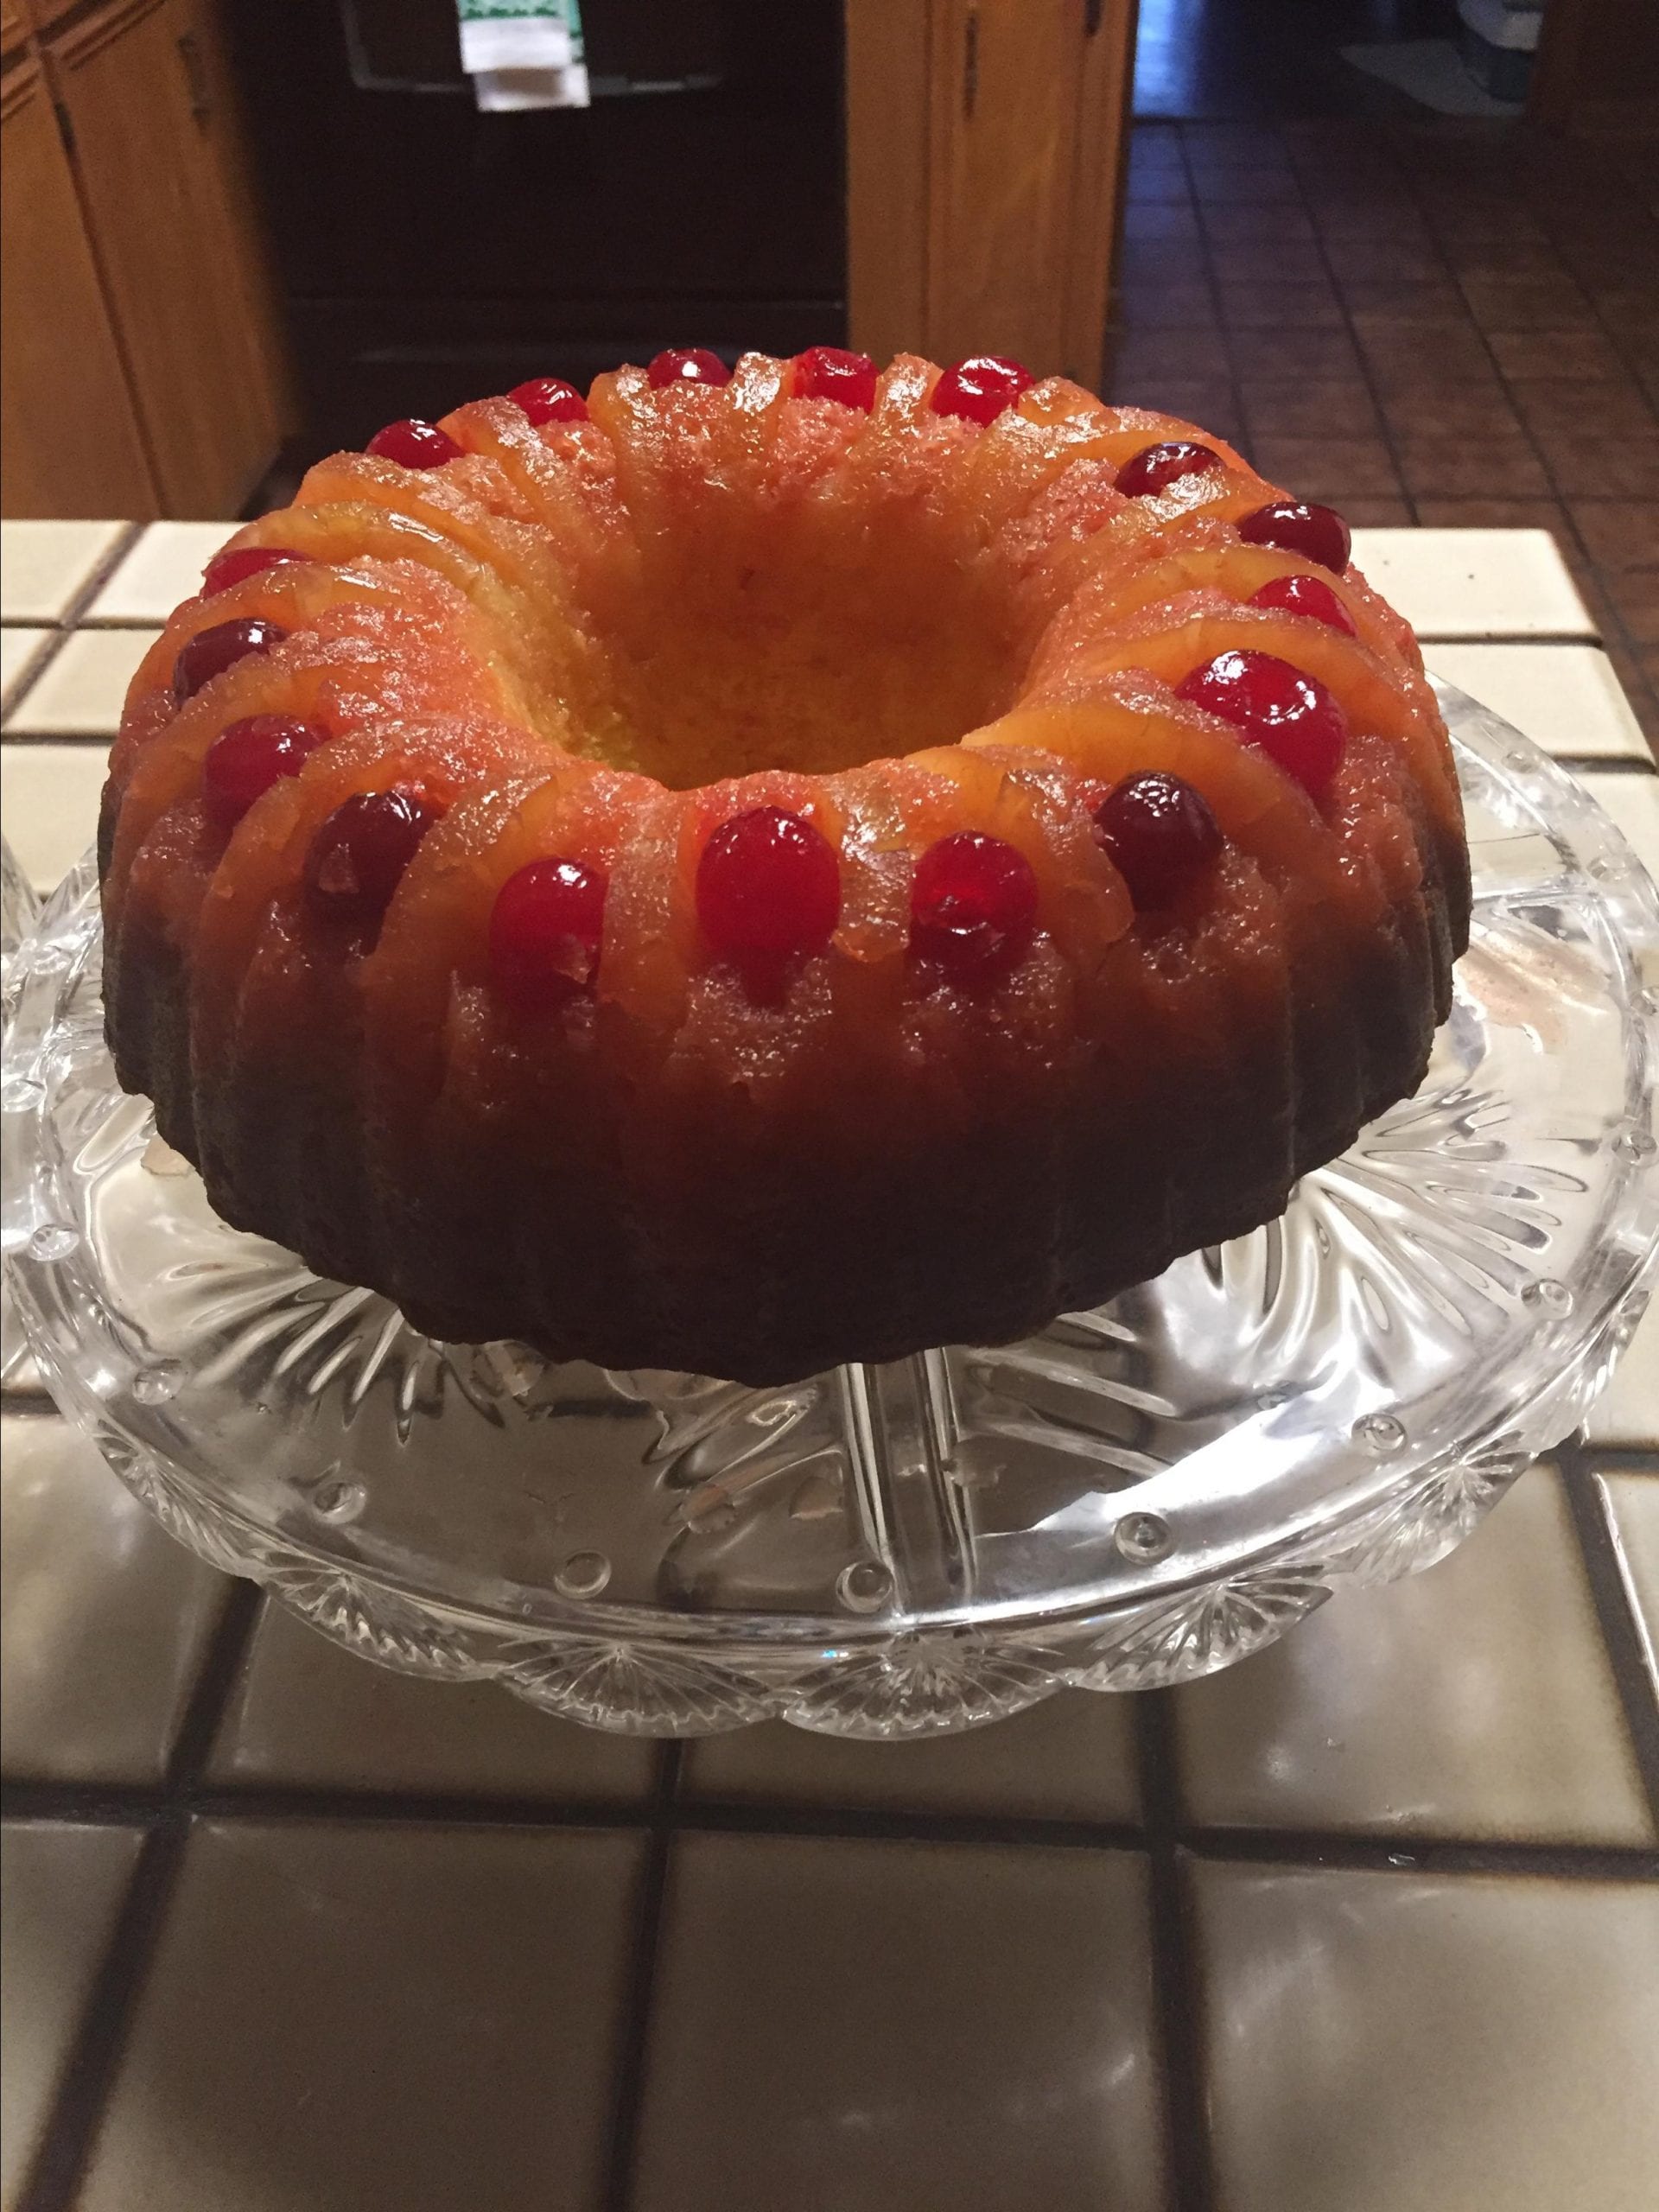 Pineapple Pound Cake - Amanda's Cookin' - Quick Breads & Muffins